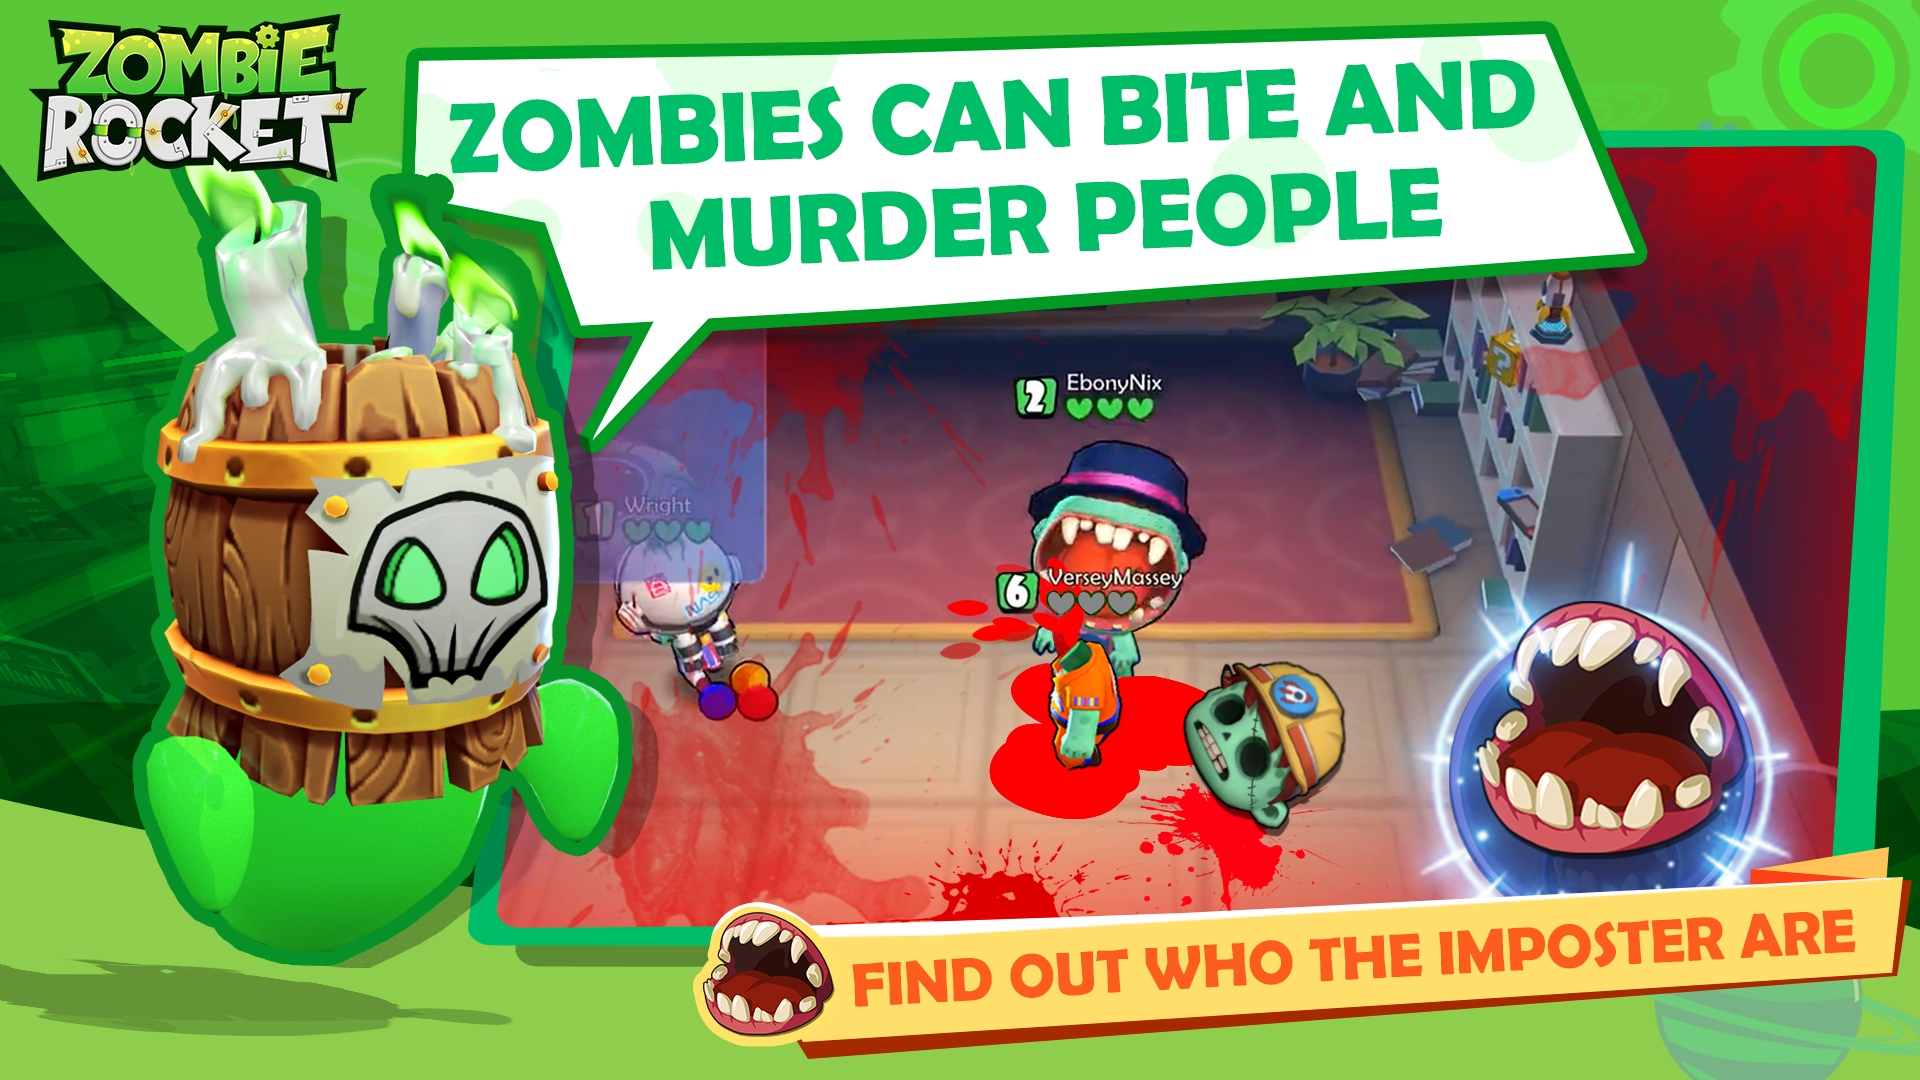 Plants vs. Zombies Heroes Cheat Hack Android iOs